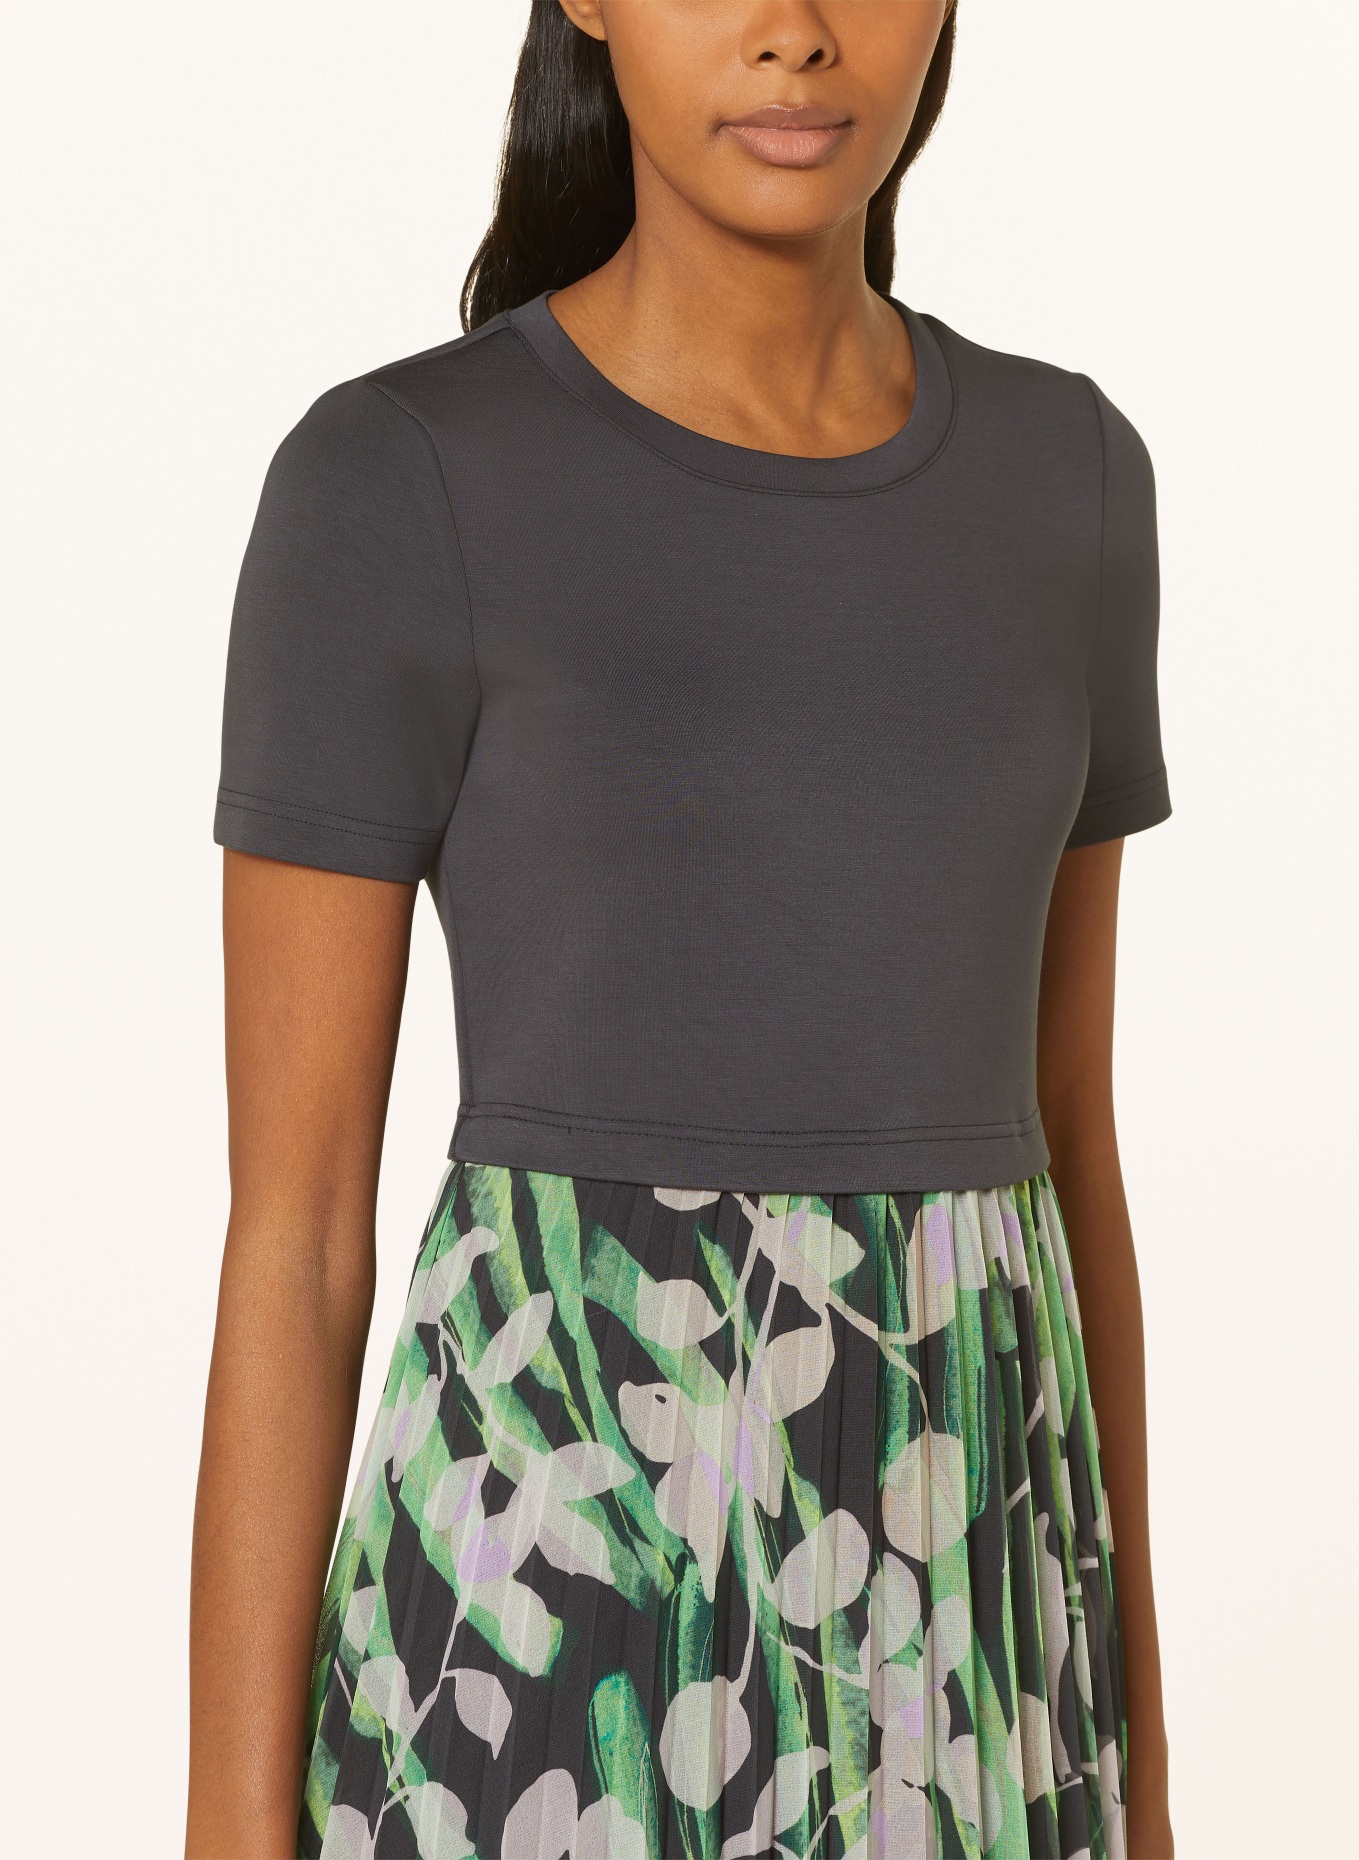 BETTY&CO Dress in mixed materials, Color: DARK GRAY/ GREEN/ PURPLE (Image 4)